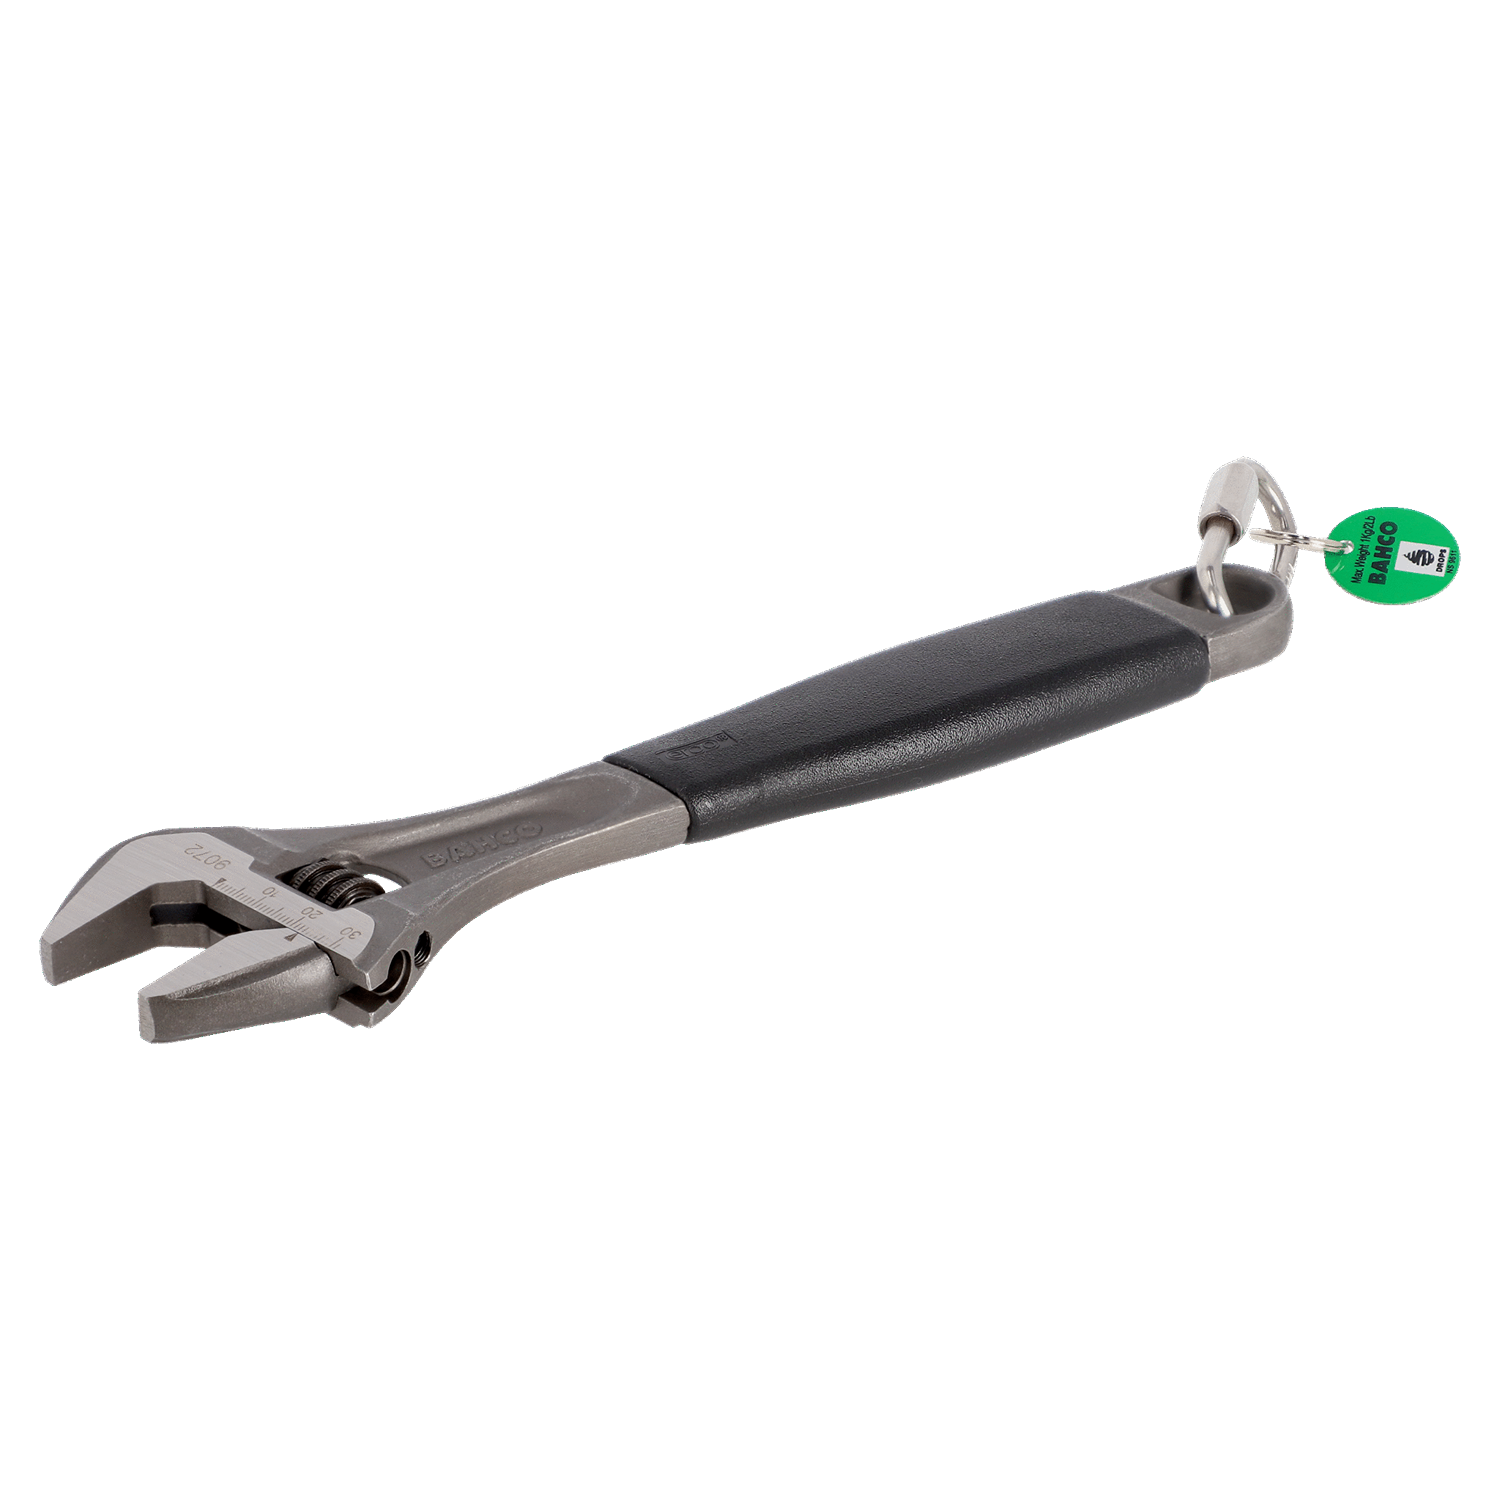 BAHCO 90TAH ERGO 90 Series Adjustable Wrench with Quick Link - Premium Adjustable Wrench from BAHCO - Shop now at Yew Aik.